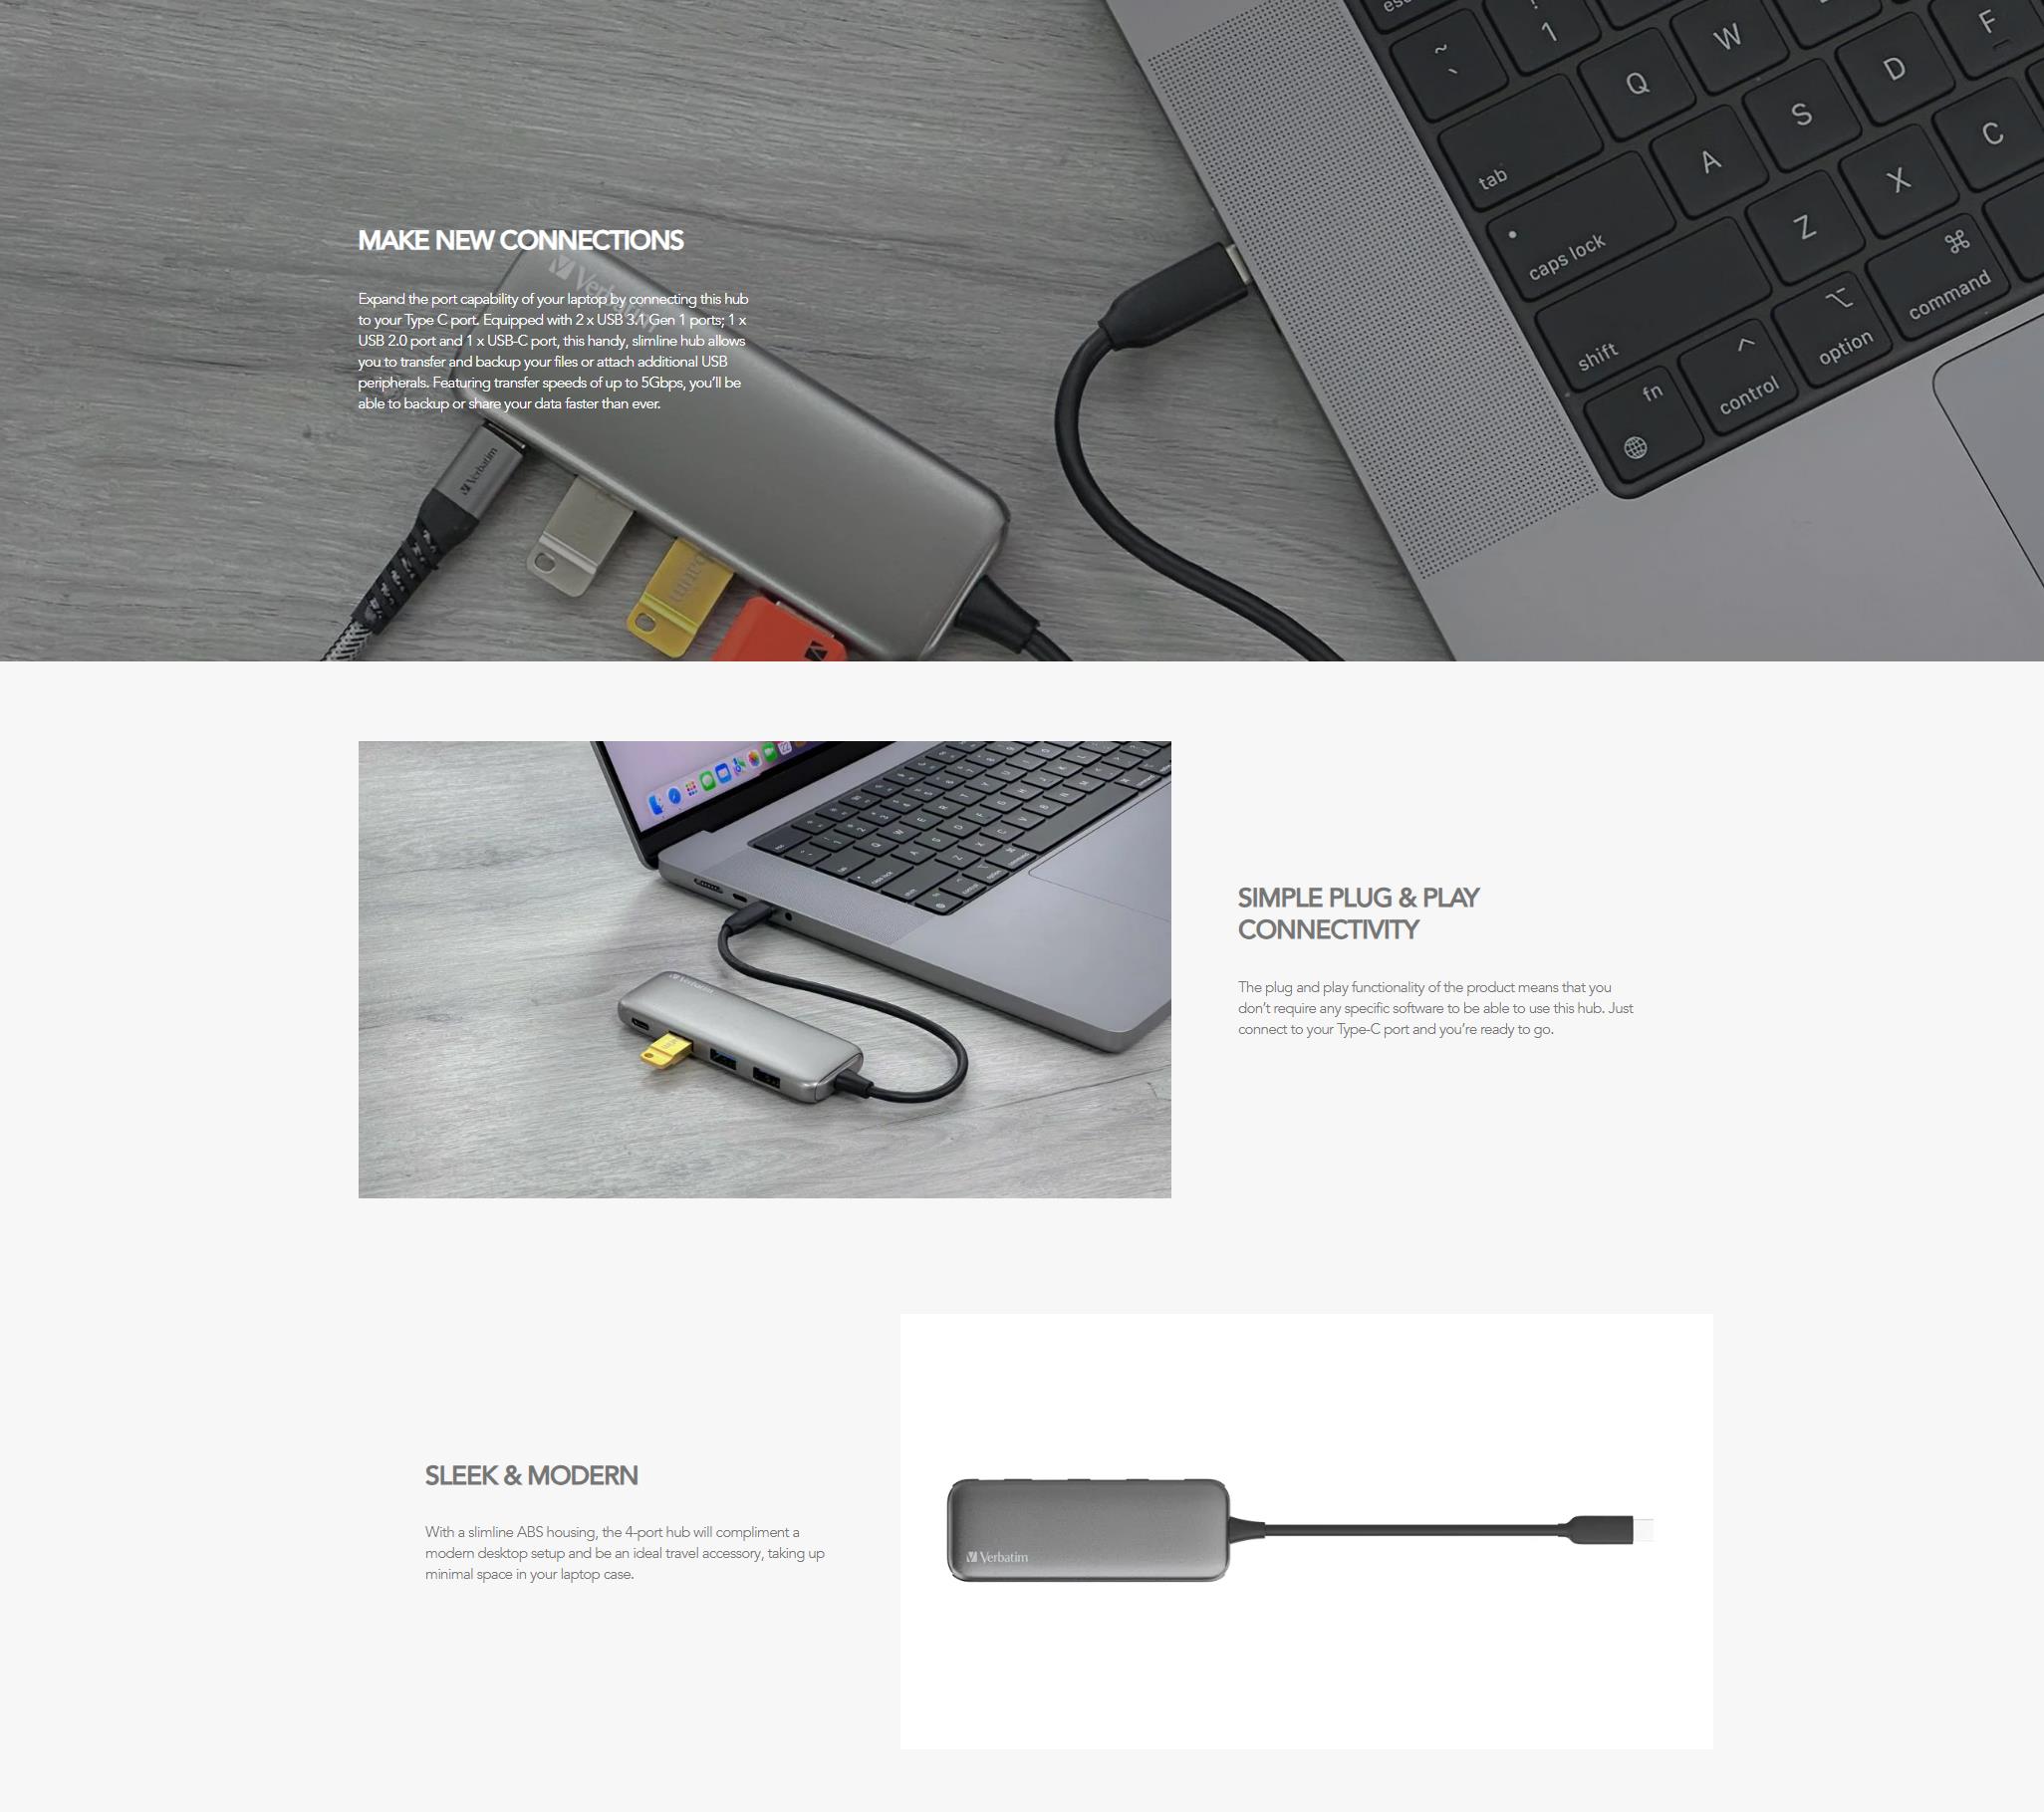 A large marketing image providing additional information about the product Verbatim USB-C Hub with 2x USB 3.0, 1x USB 2.0 1x USB C port - Space Grey - Additional alt info not provided